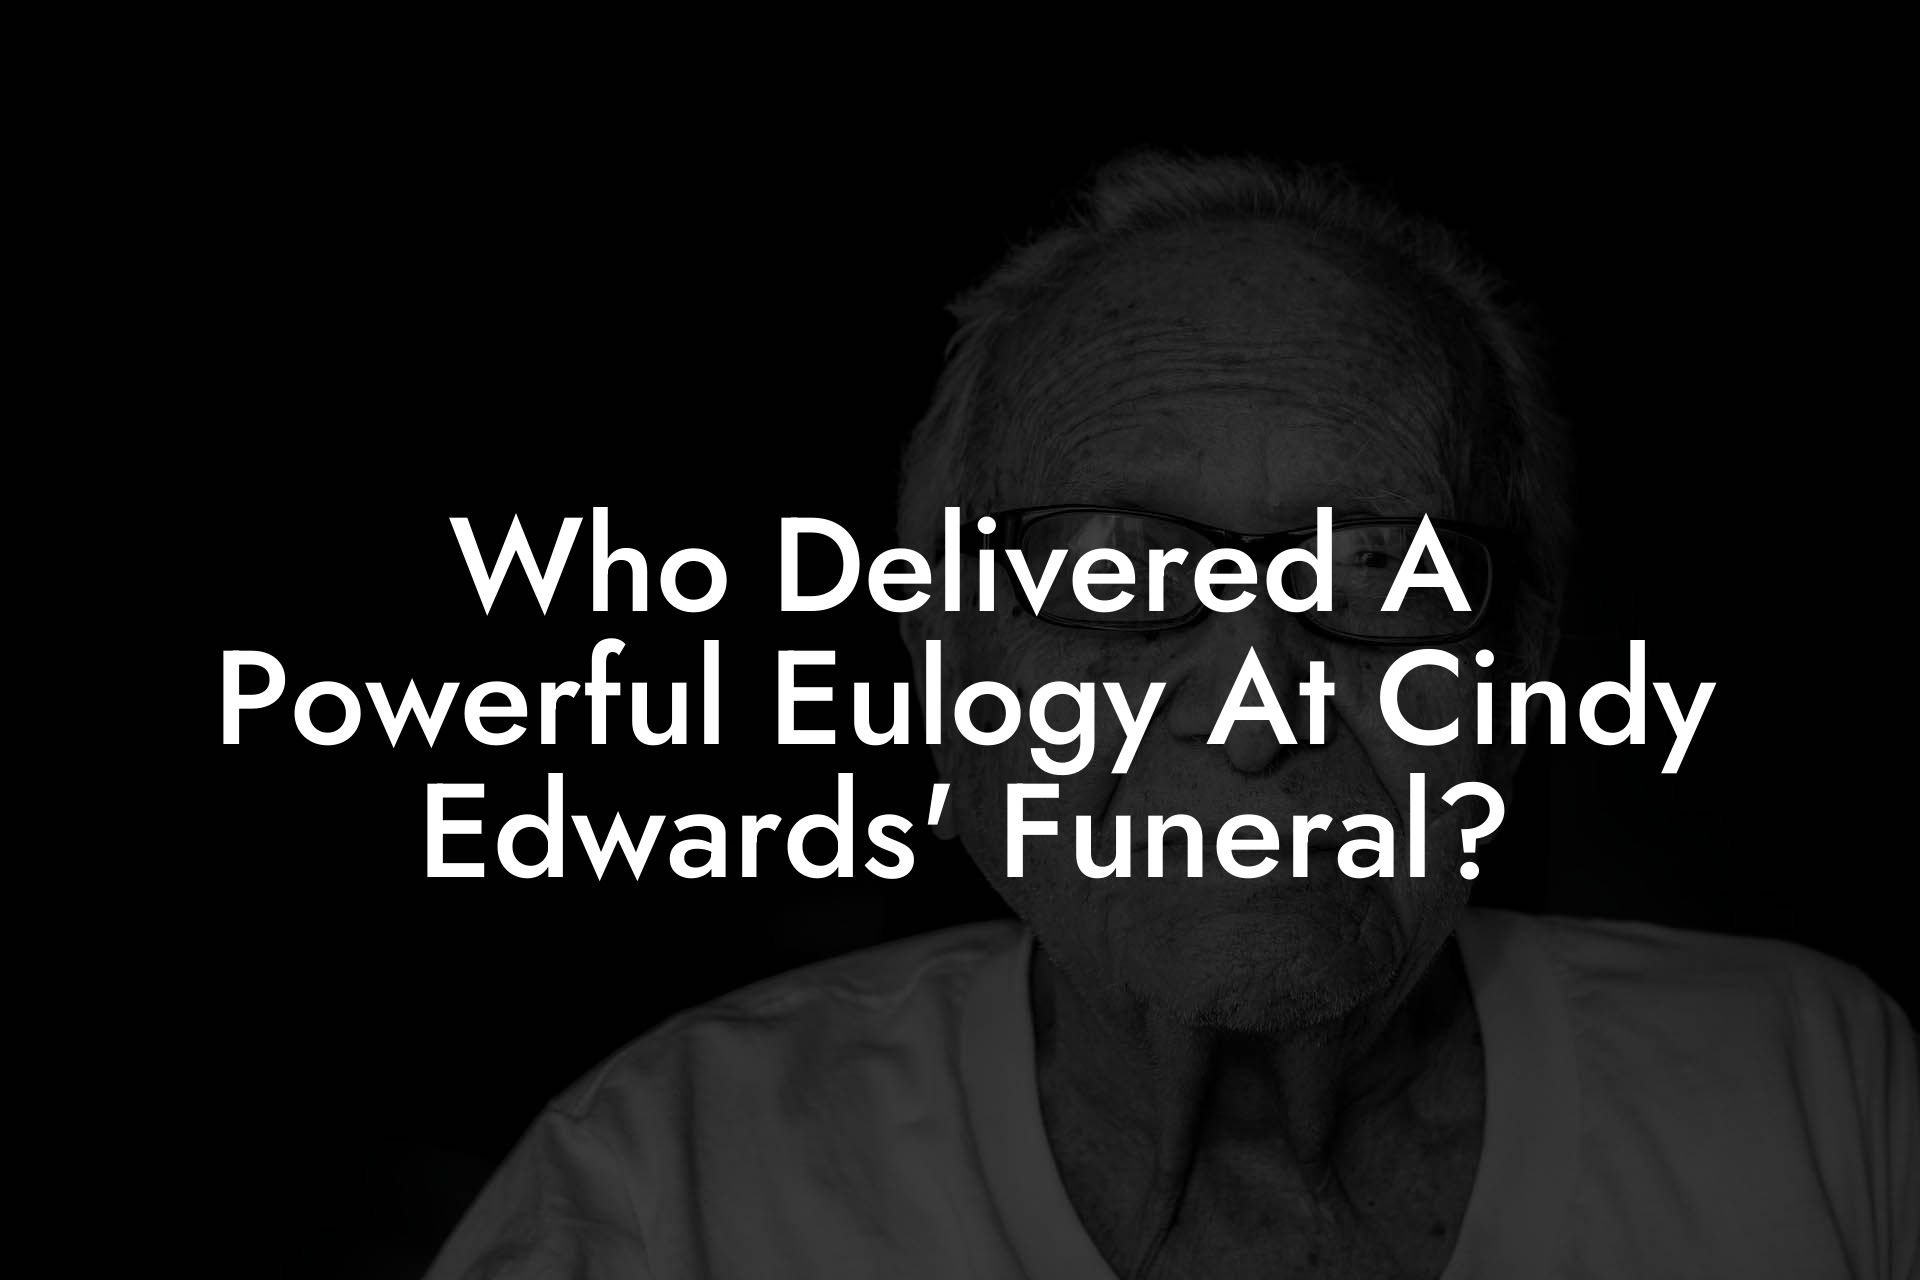 Who Delivered A Powerful Eulogy At Cindy Edwards' Funeral?